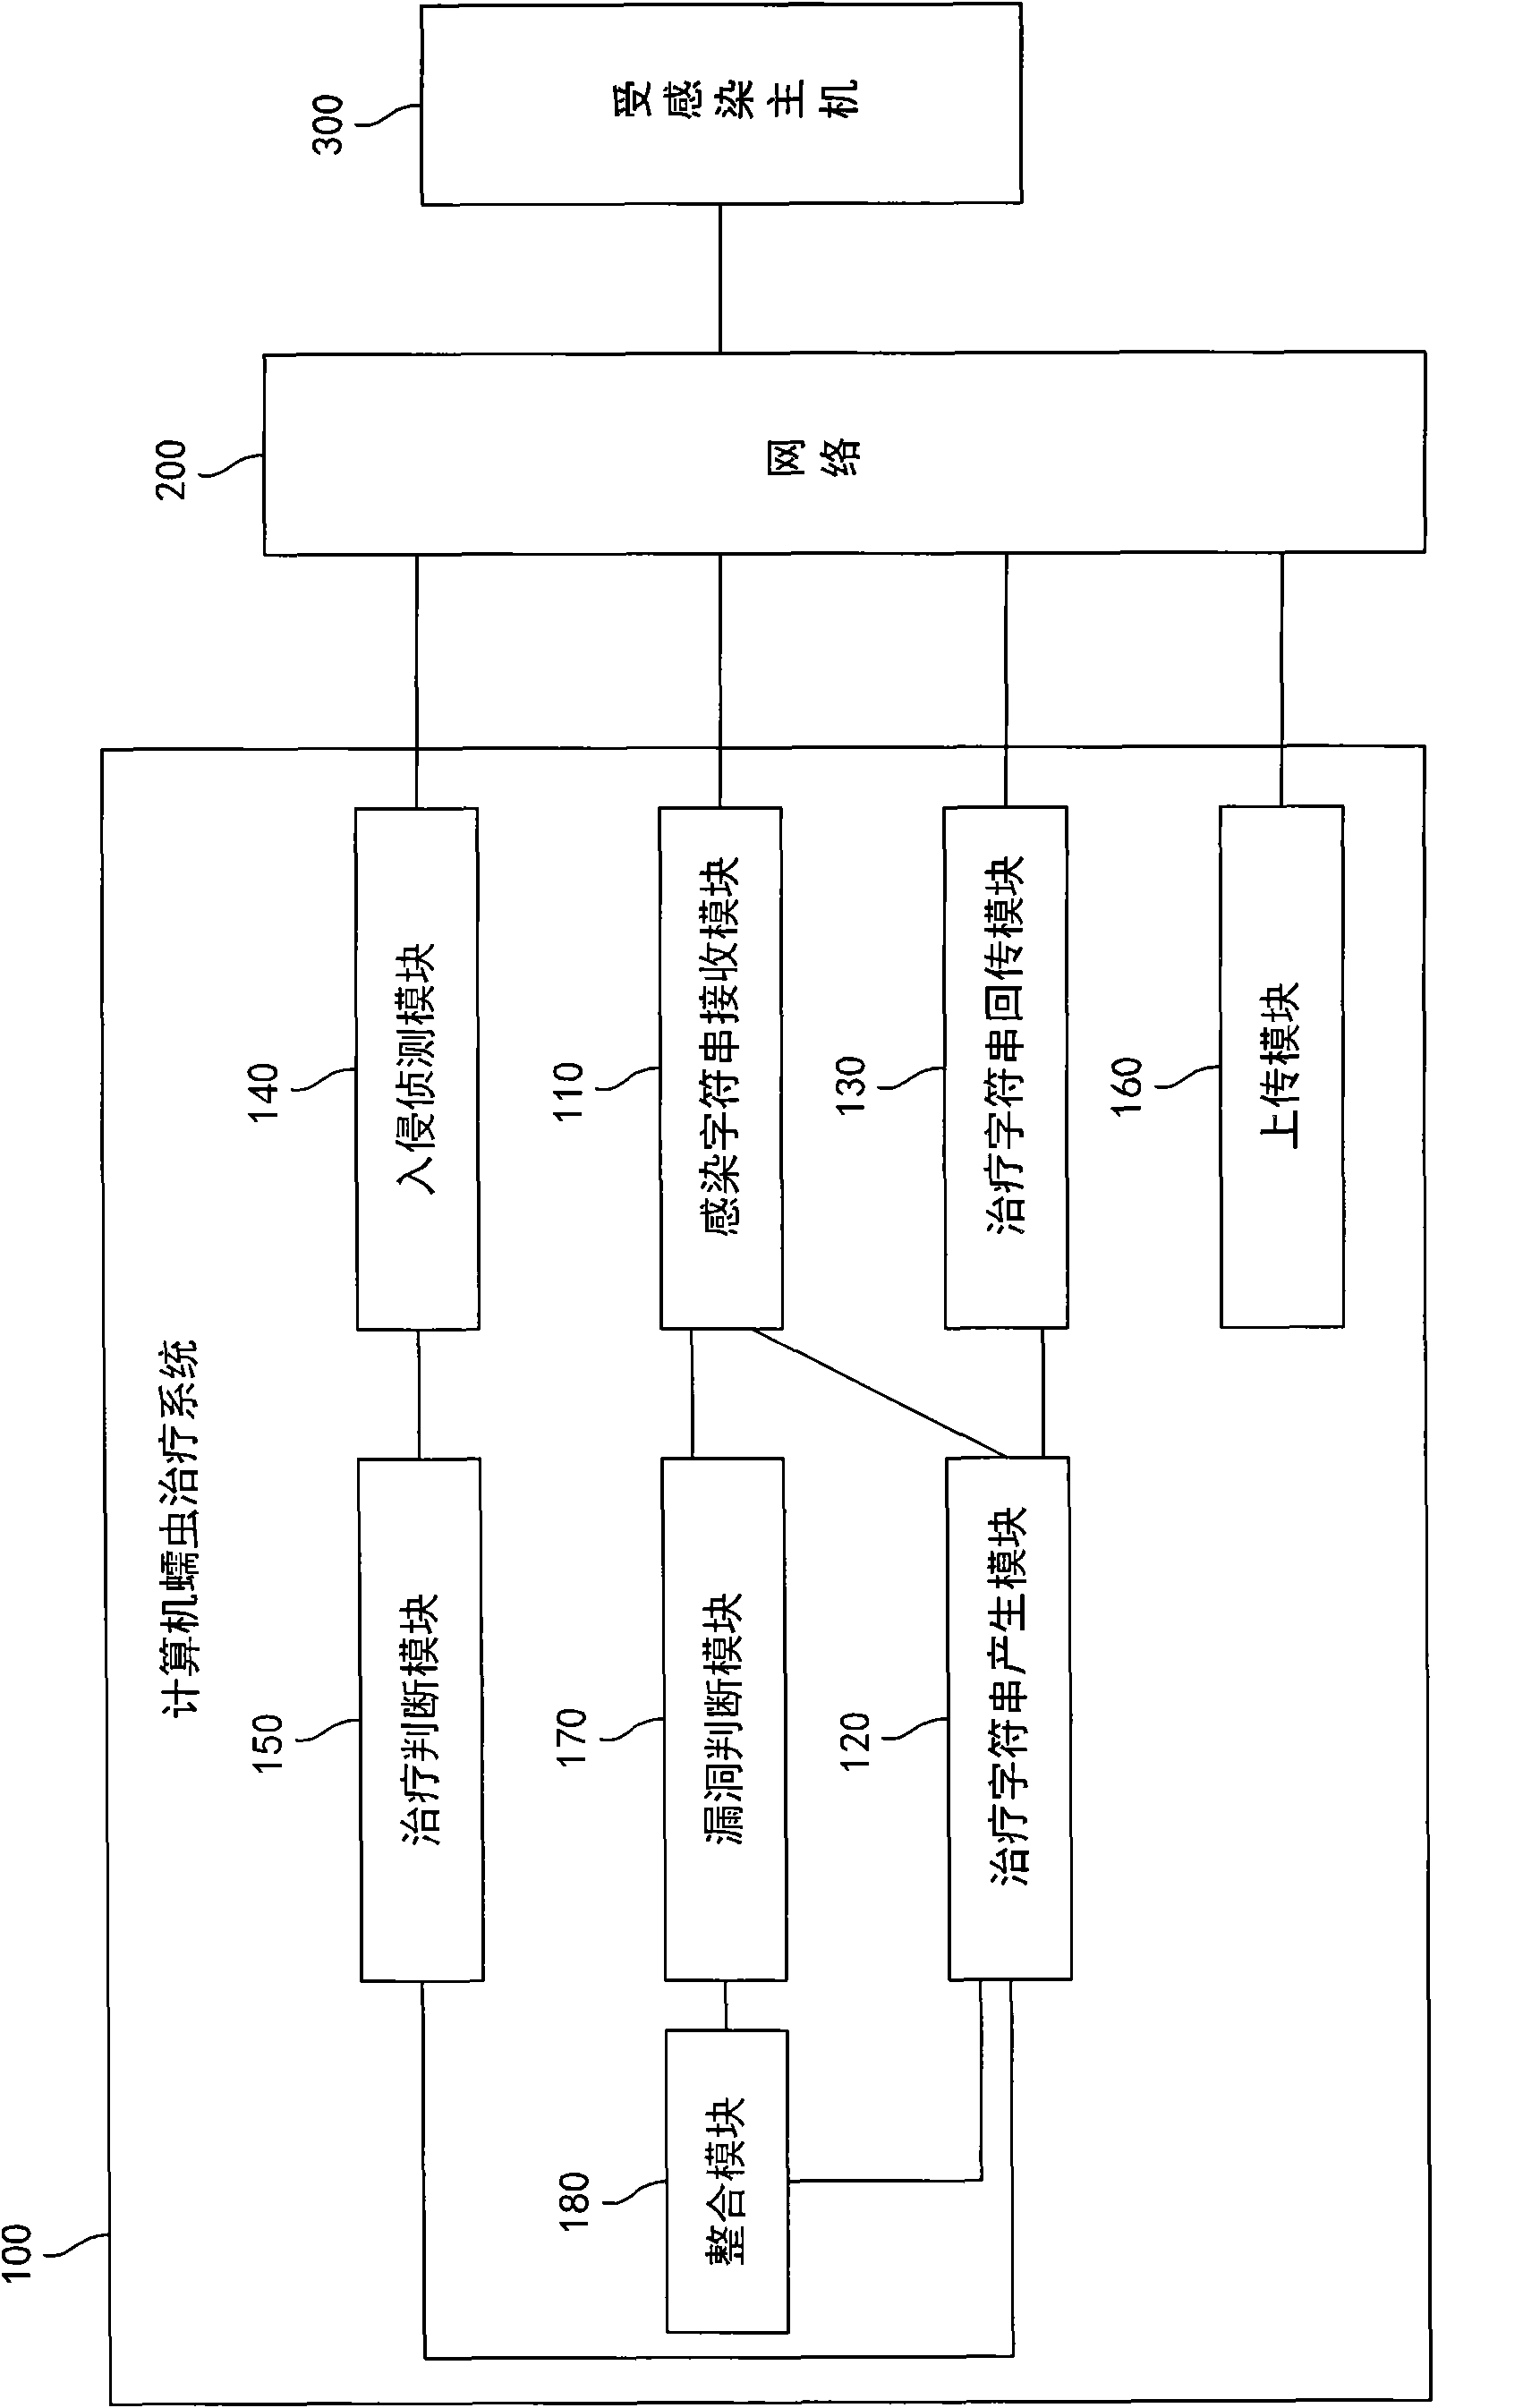 System and method for treating computer worms